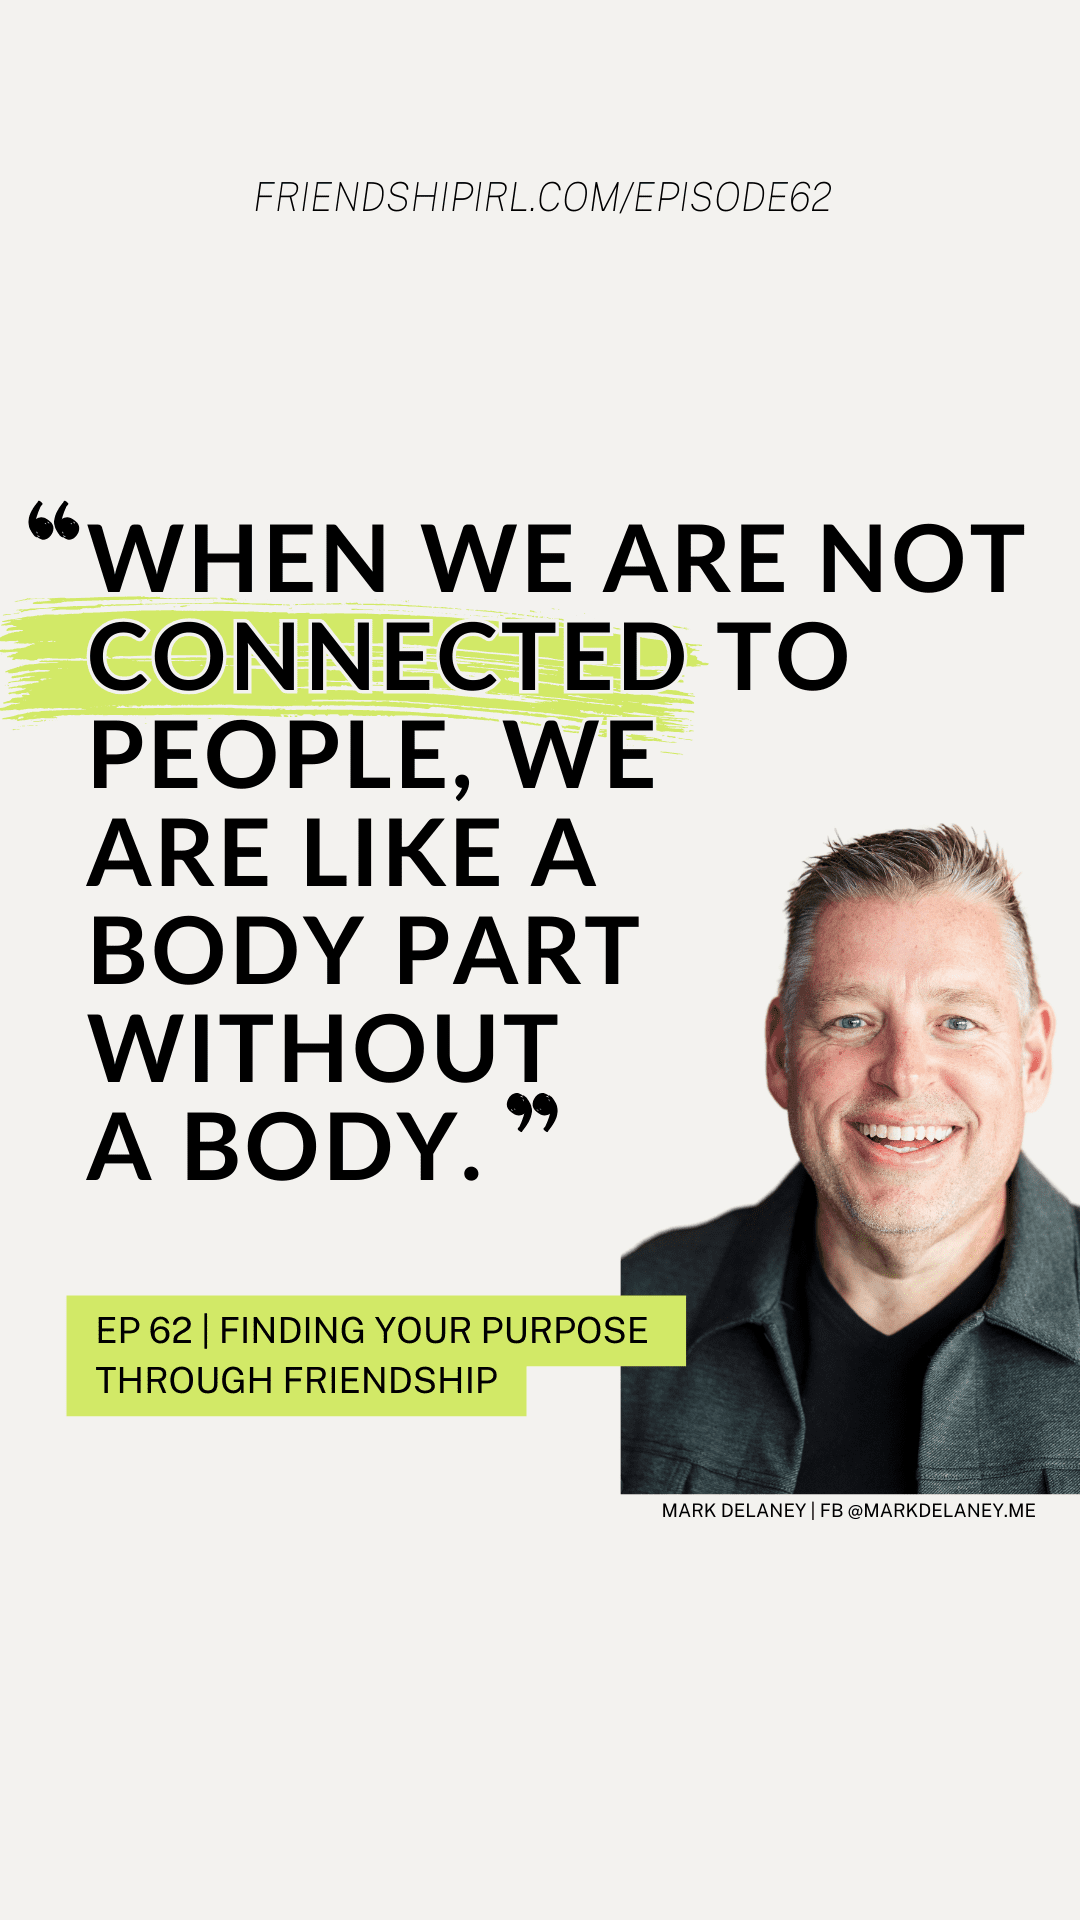 "When we are not connected to people, we are like a body part without a body." - Mark Delaney, Episode 62 of the Friendship IRL Podcast titled "Finding your purpose Through Friendship."